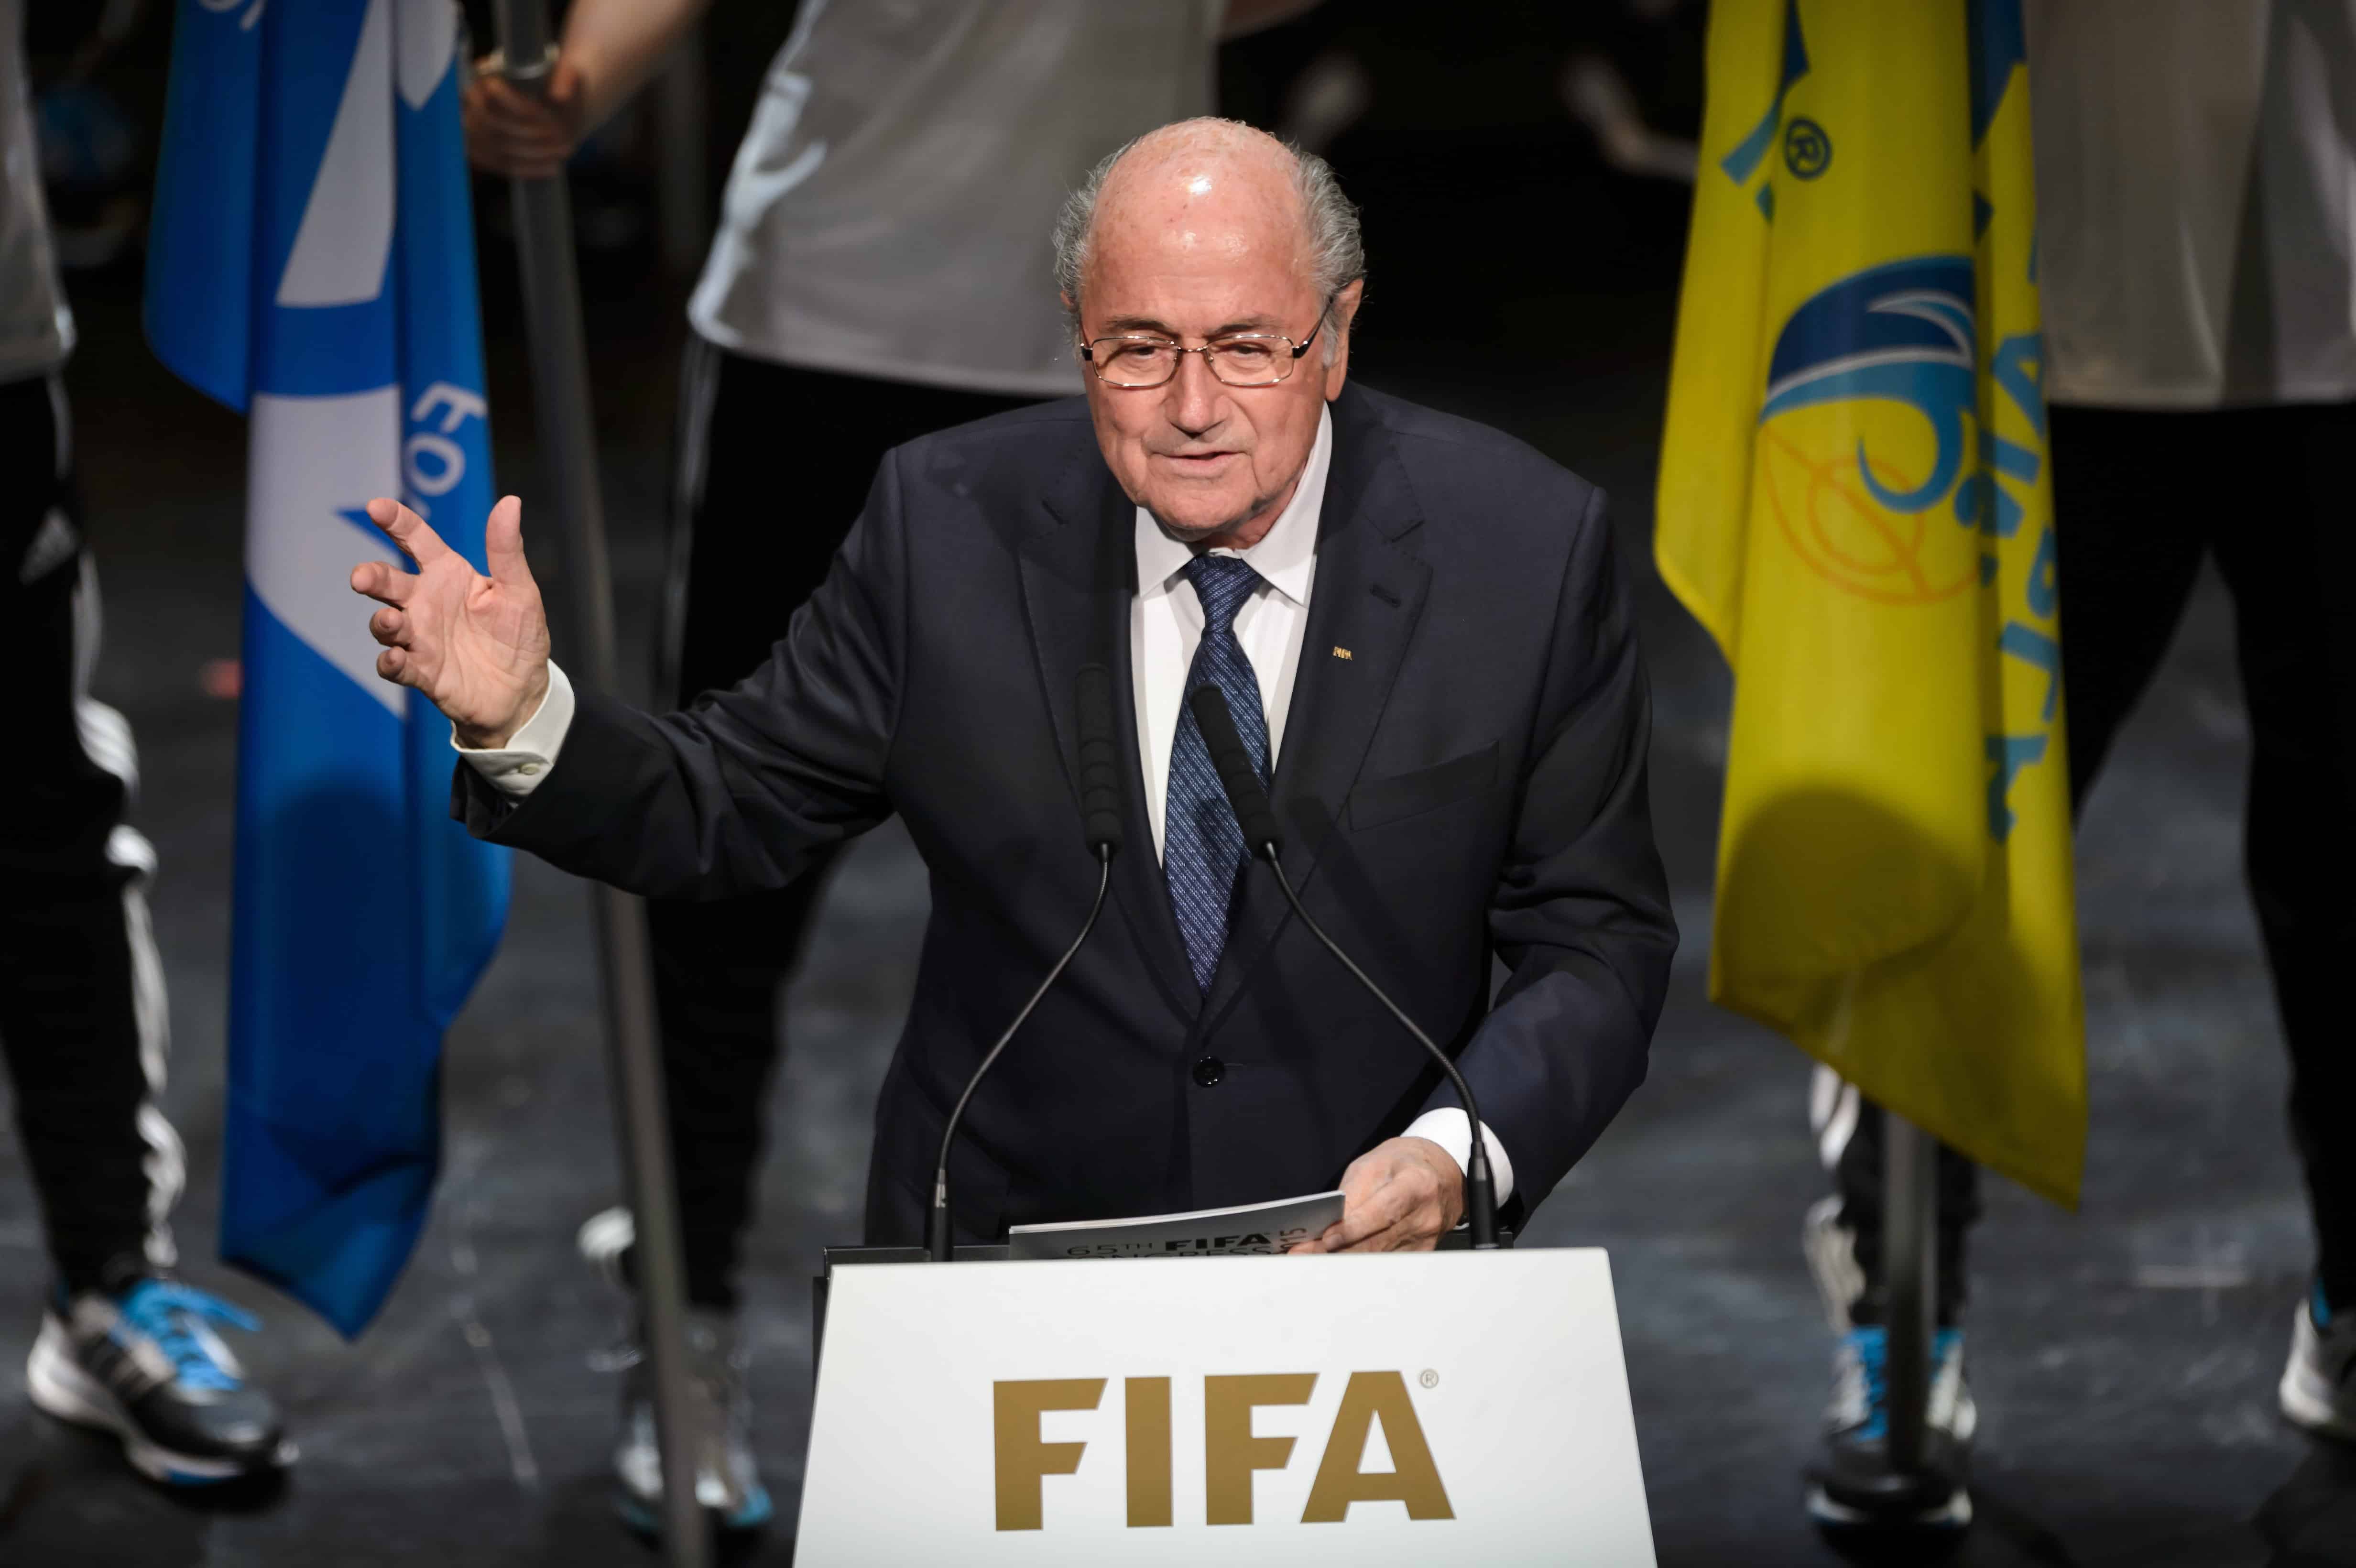 FIFA President Sepp Blatter speaks during the opening ceremony of the 65th FIFA Congress in Zurich.